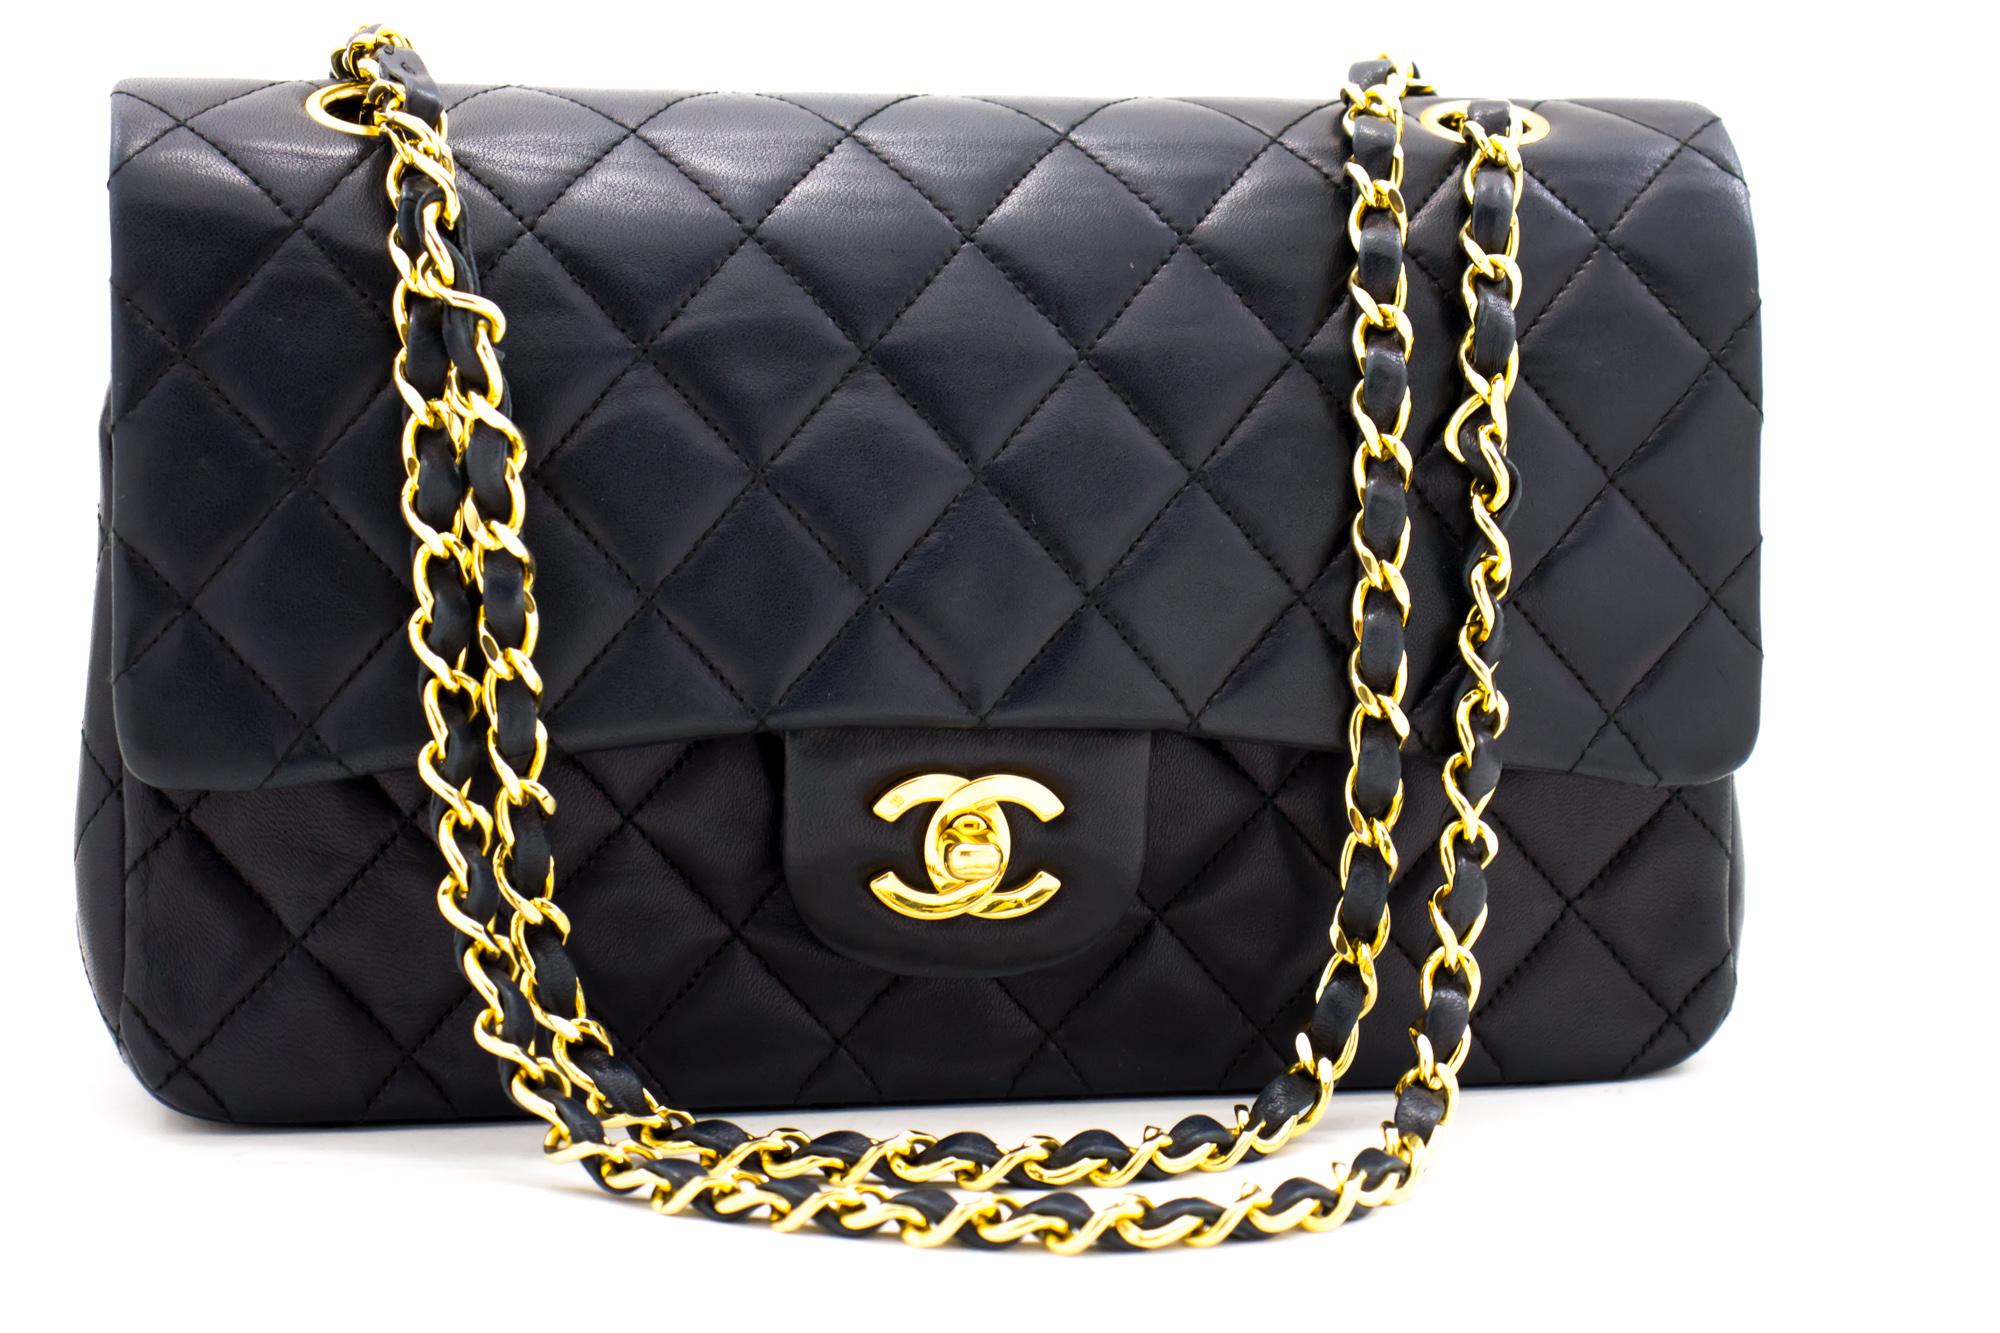 An authentic CHANEL 2.55 Classic Double Flap Dark Navy Medium Chain Shoulder Bag Lamb. The color is Navy. The outside material is Leather. The pattern is Solid. This item is Vintage / Classic. The year of manufacture would be 1989-1991.
Conditions &